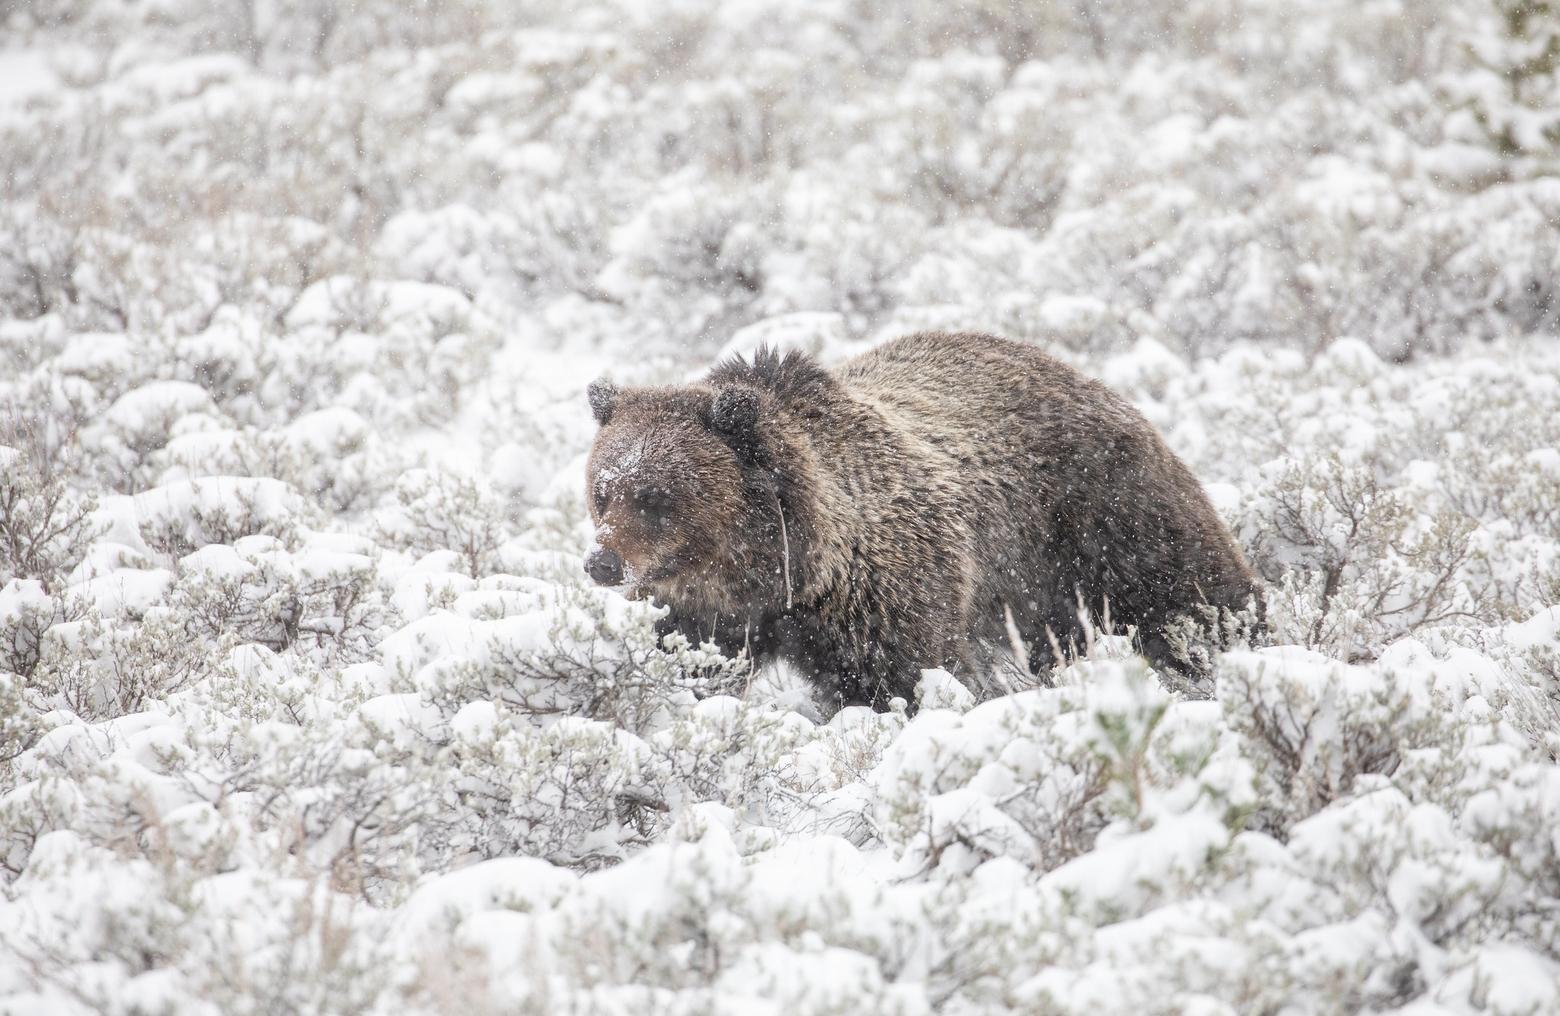 A grizzly in early winter conditions. During unseasonably warm winters, grizzlies can emerge from hibernation as early as January. NPS photo